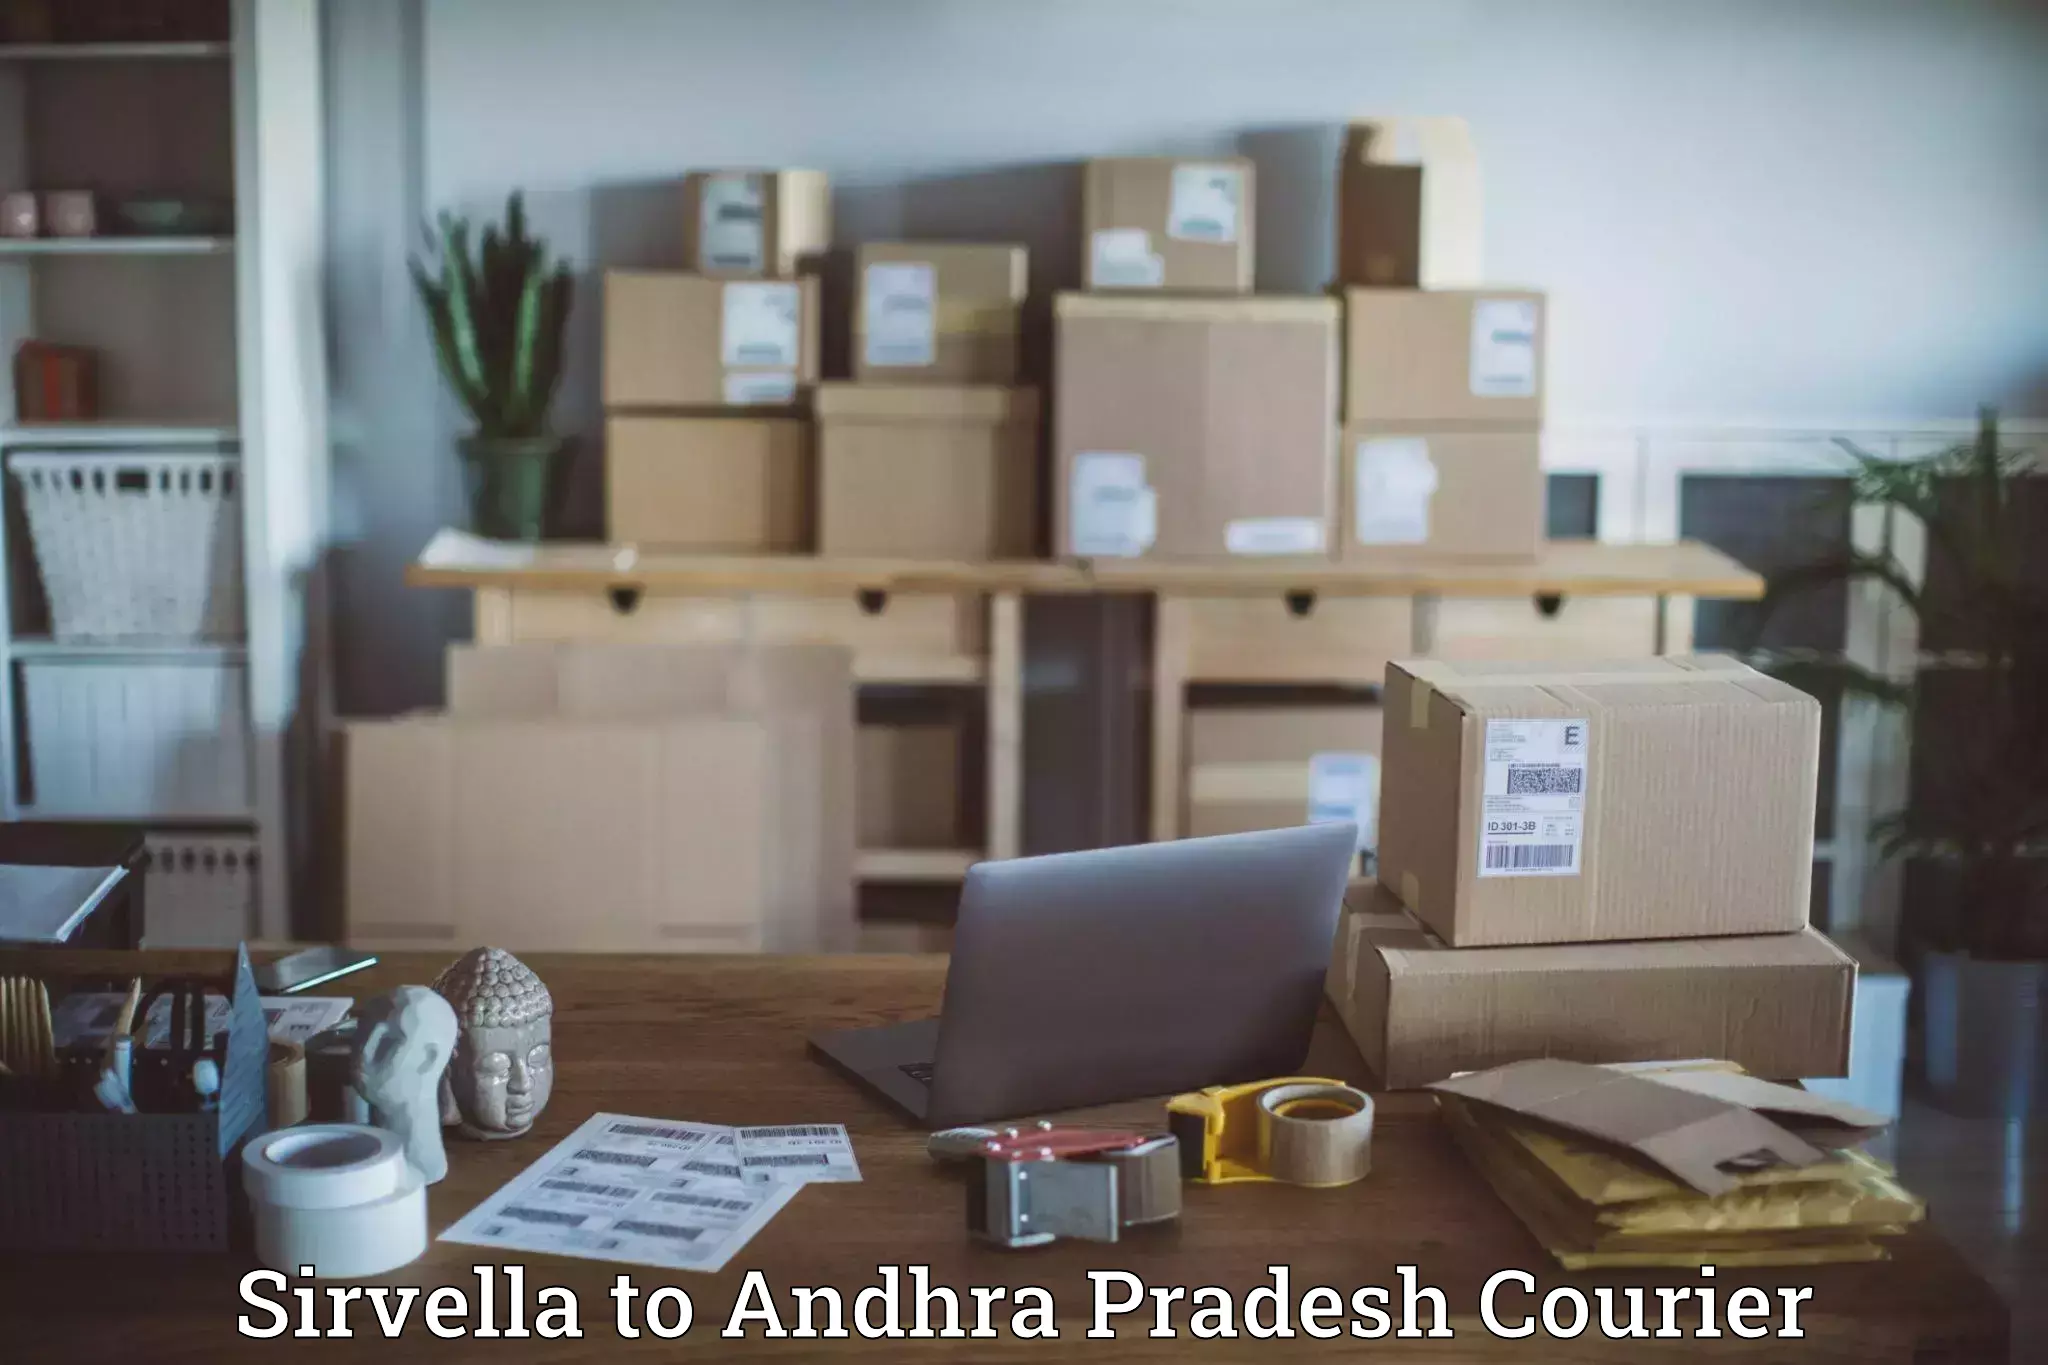 Subscription-based courier Sirvella to Guntur